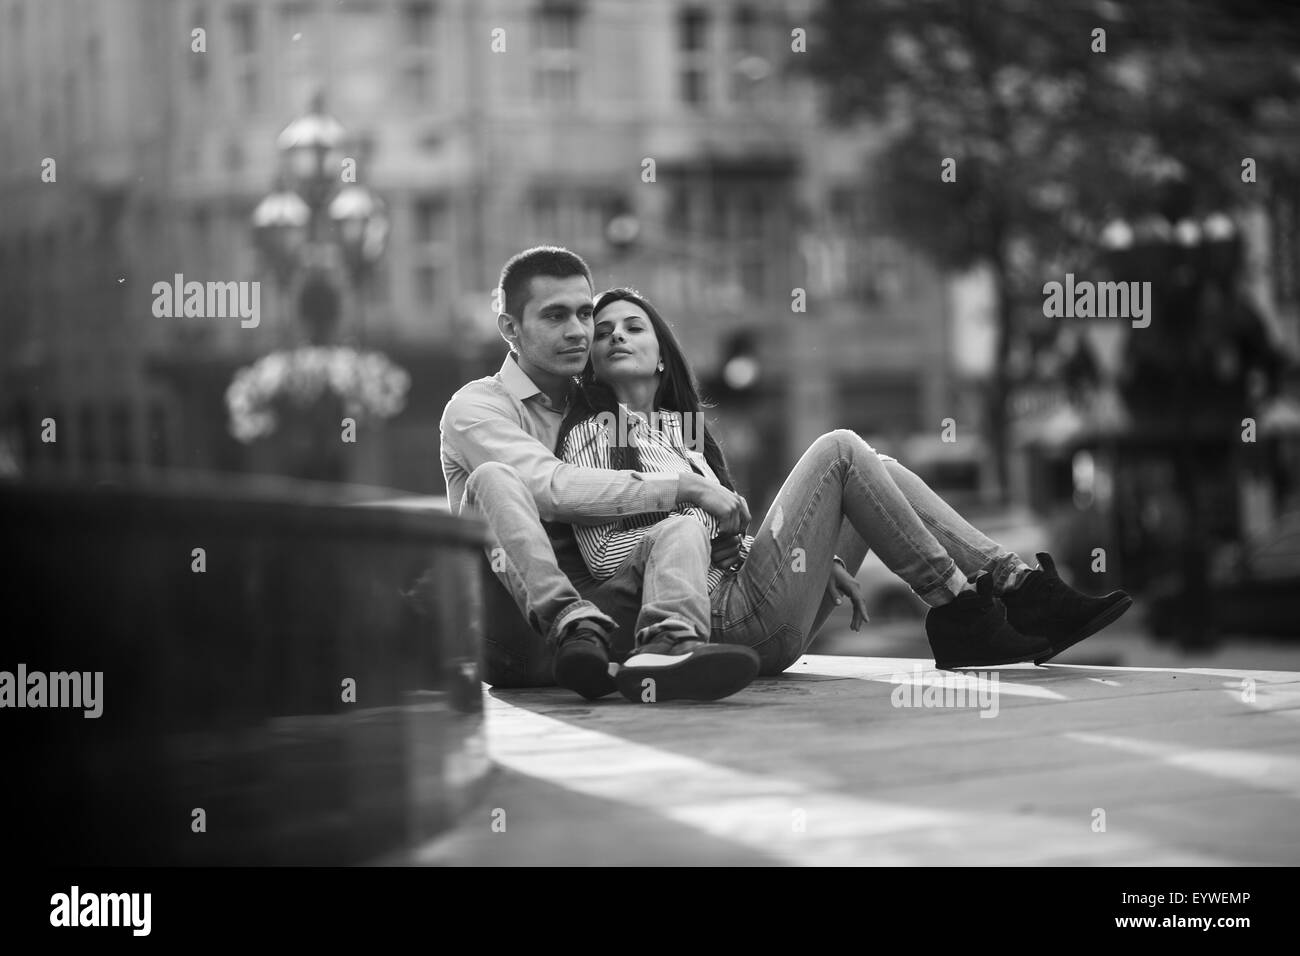 Couple  in the city Stock Photo